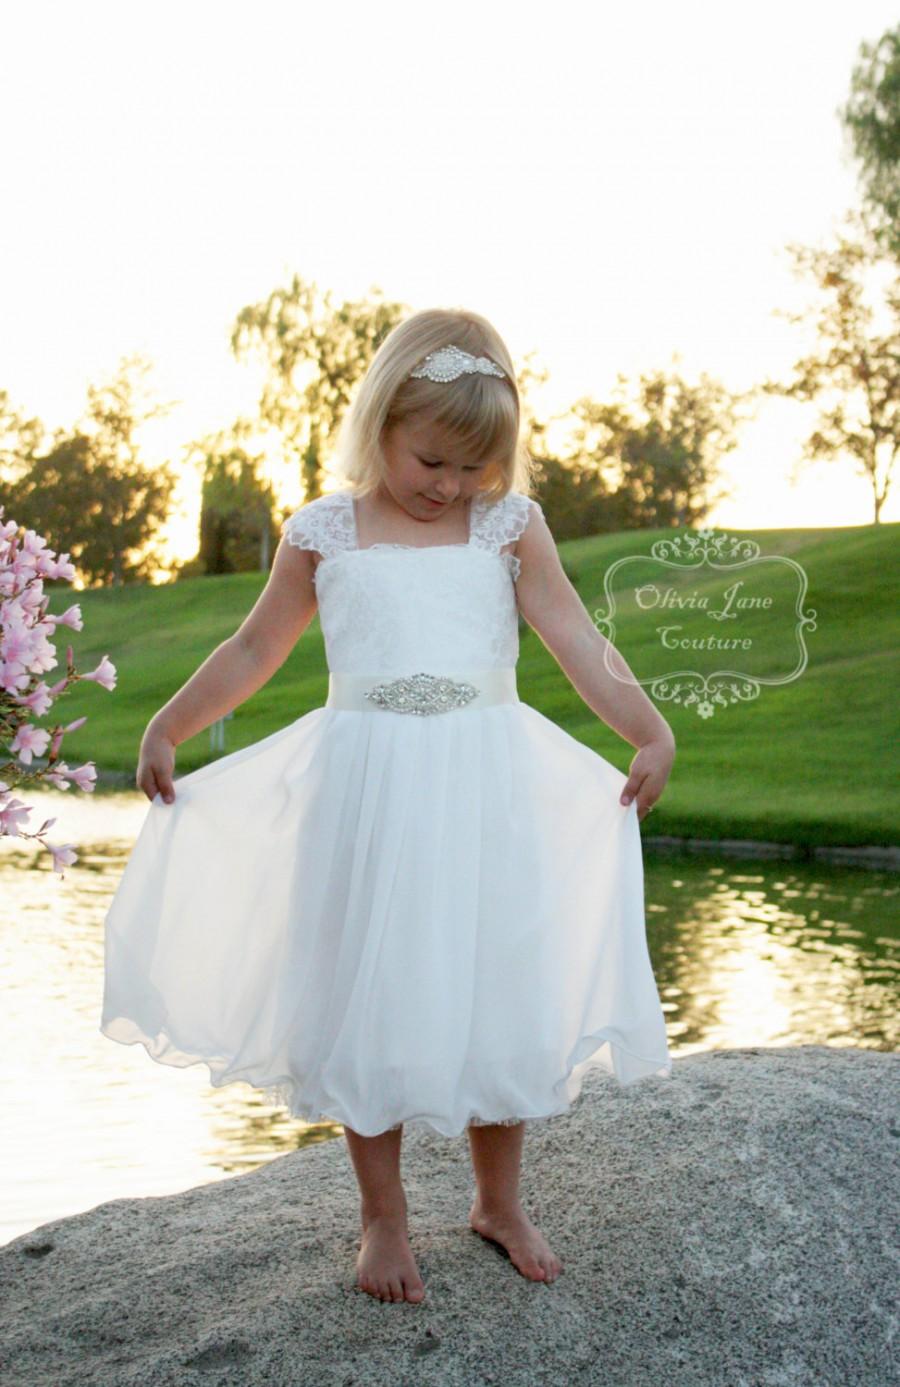 Wedding - Claire Flower Girl Dress - Ivory Lace Flower Girl Dress - Beach Wedding Flower Girl Dress - Boho Flower Girl Dress - Junior Bridesmaid Dress